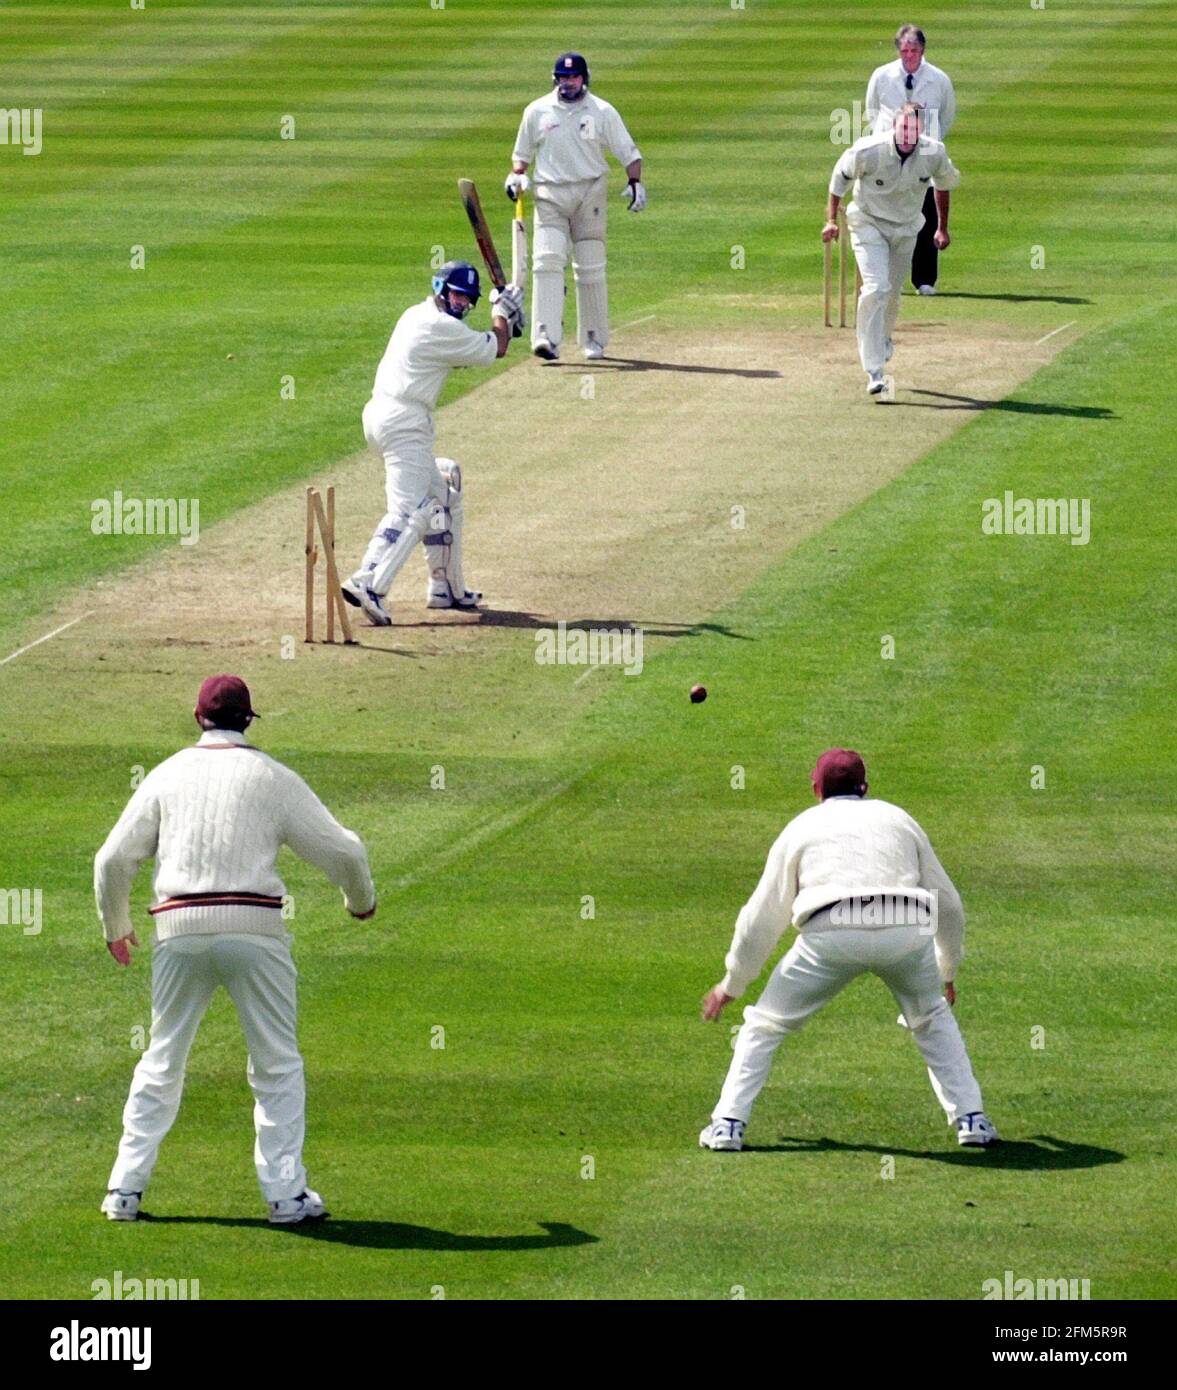 COUNTY CRICKET - ESSEX V NORTHANTS, APR 2001 NASSER HUSSAIN OUT BOWLED Stockfoto